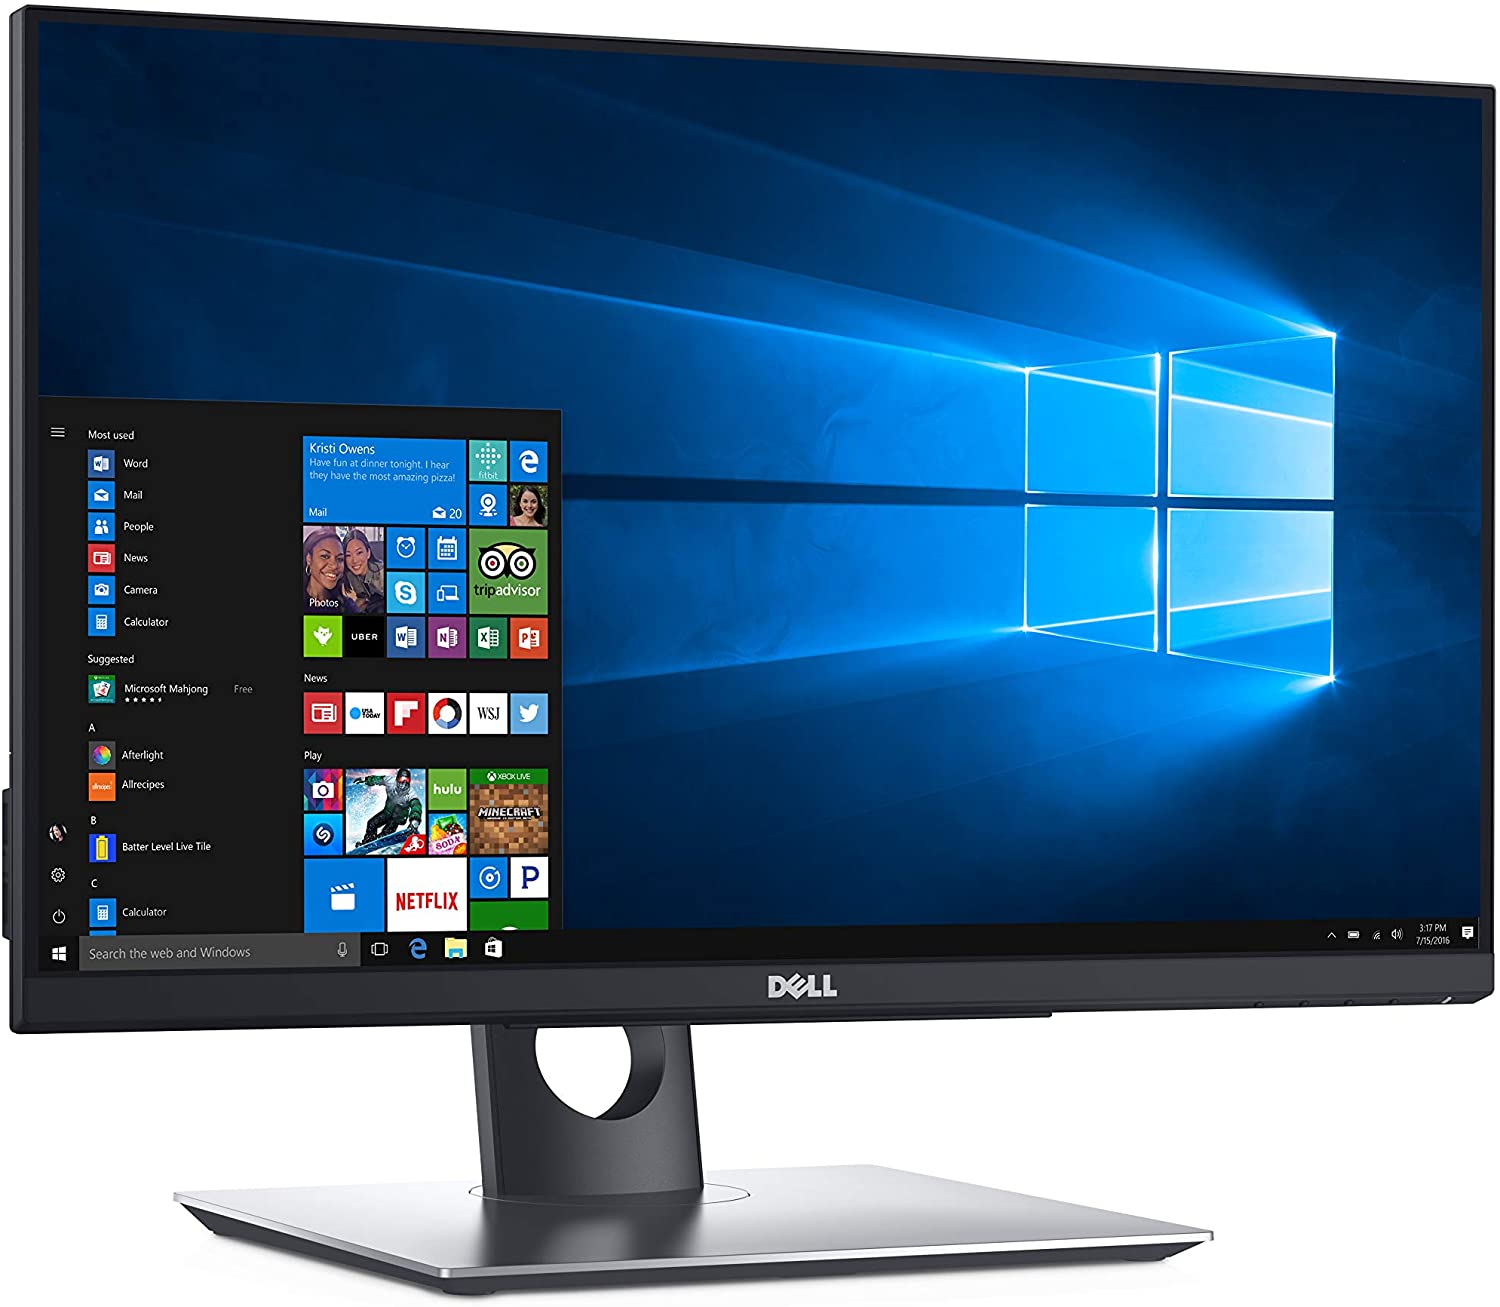 DELL P2418HT 23.8" Touch Monitor-1920X1080 LED-Lit, Black